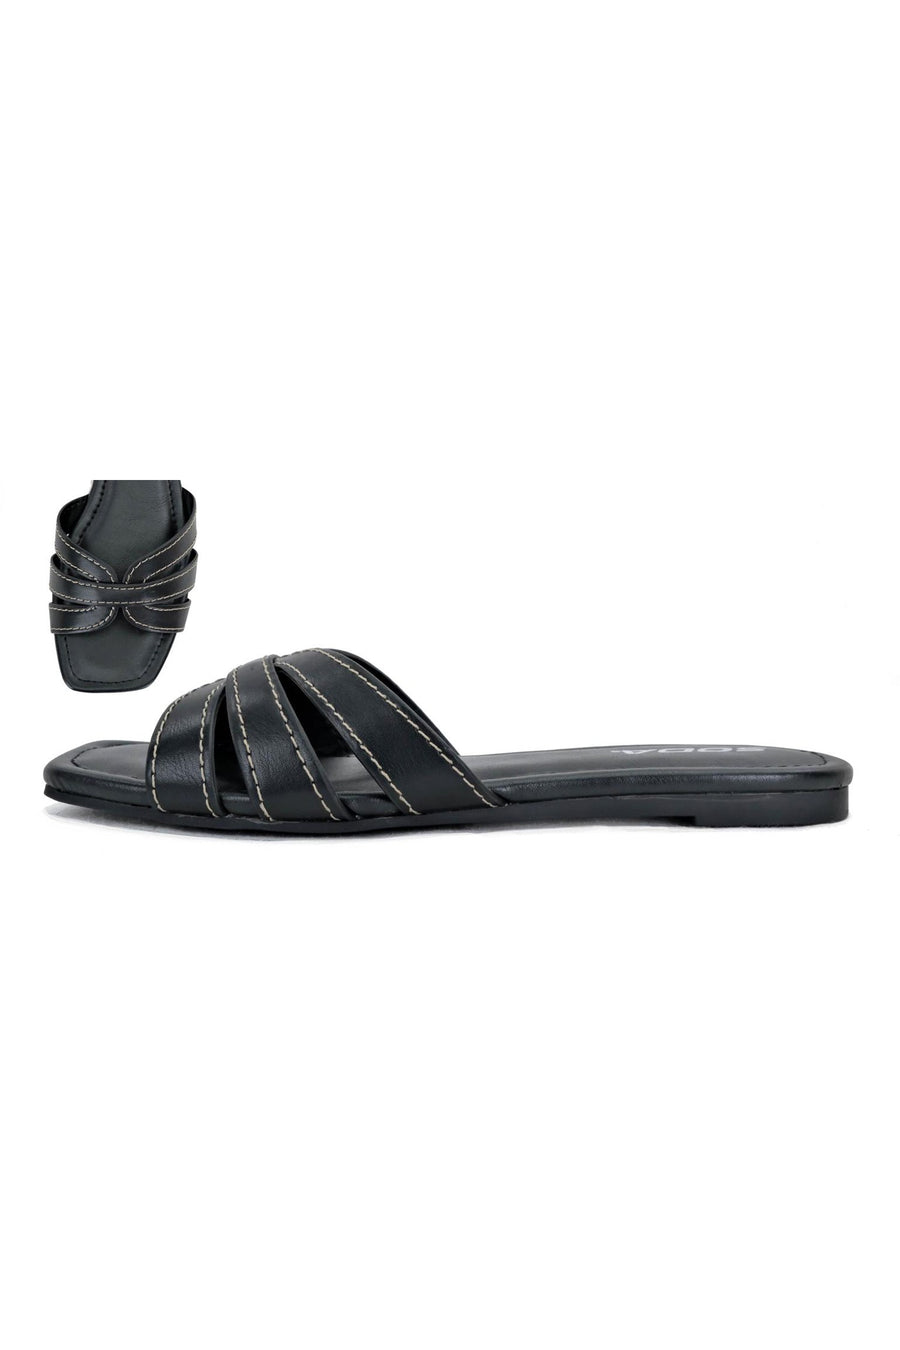 Featuring a flat open toe, strappy sandal in black.